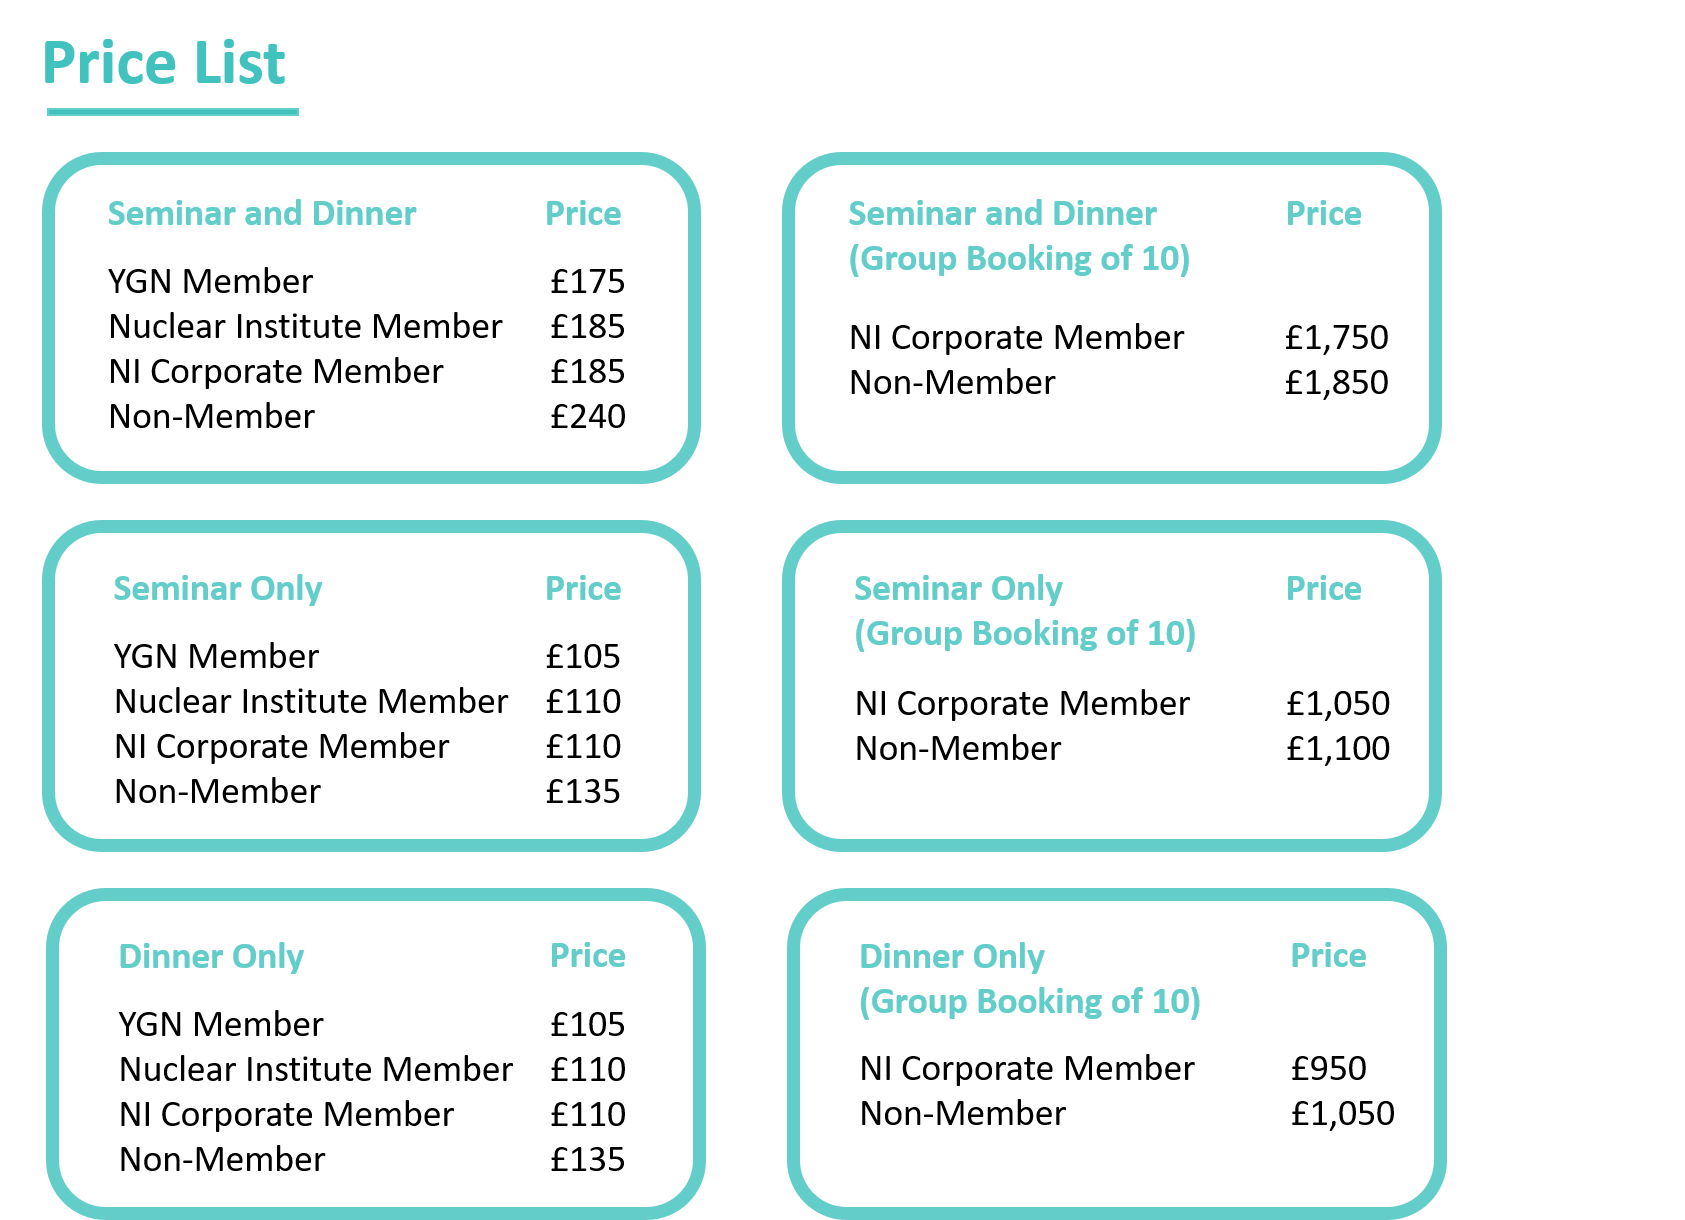 Prices update